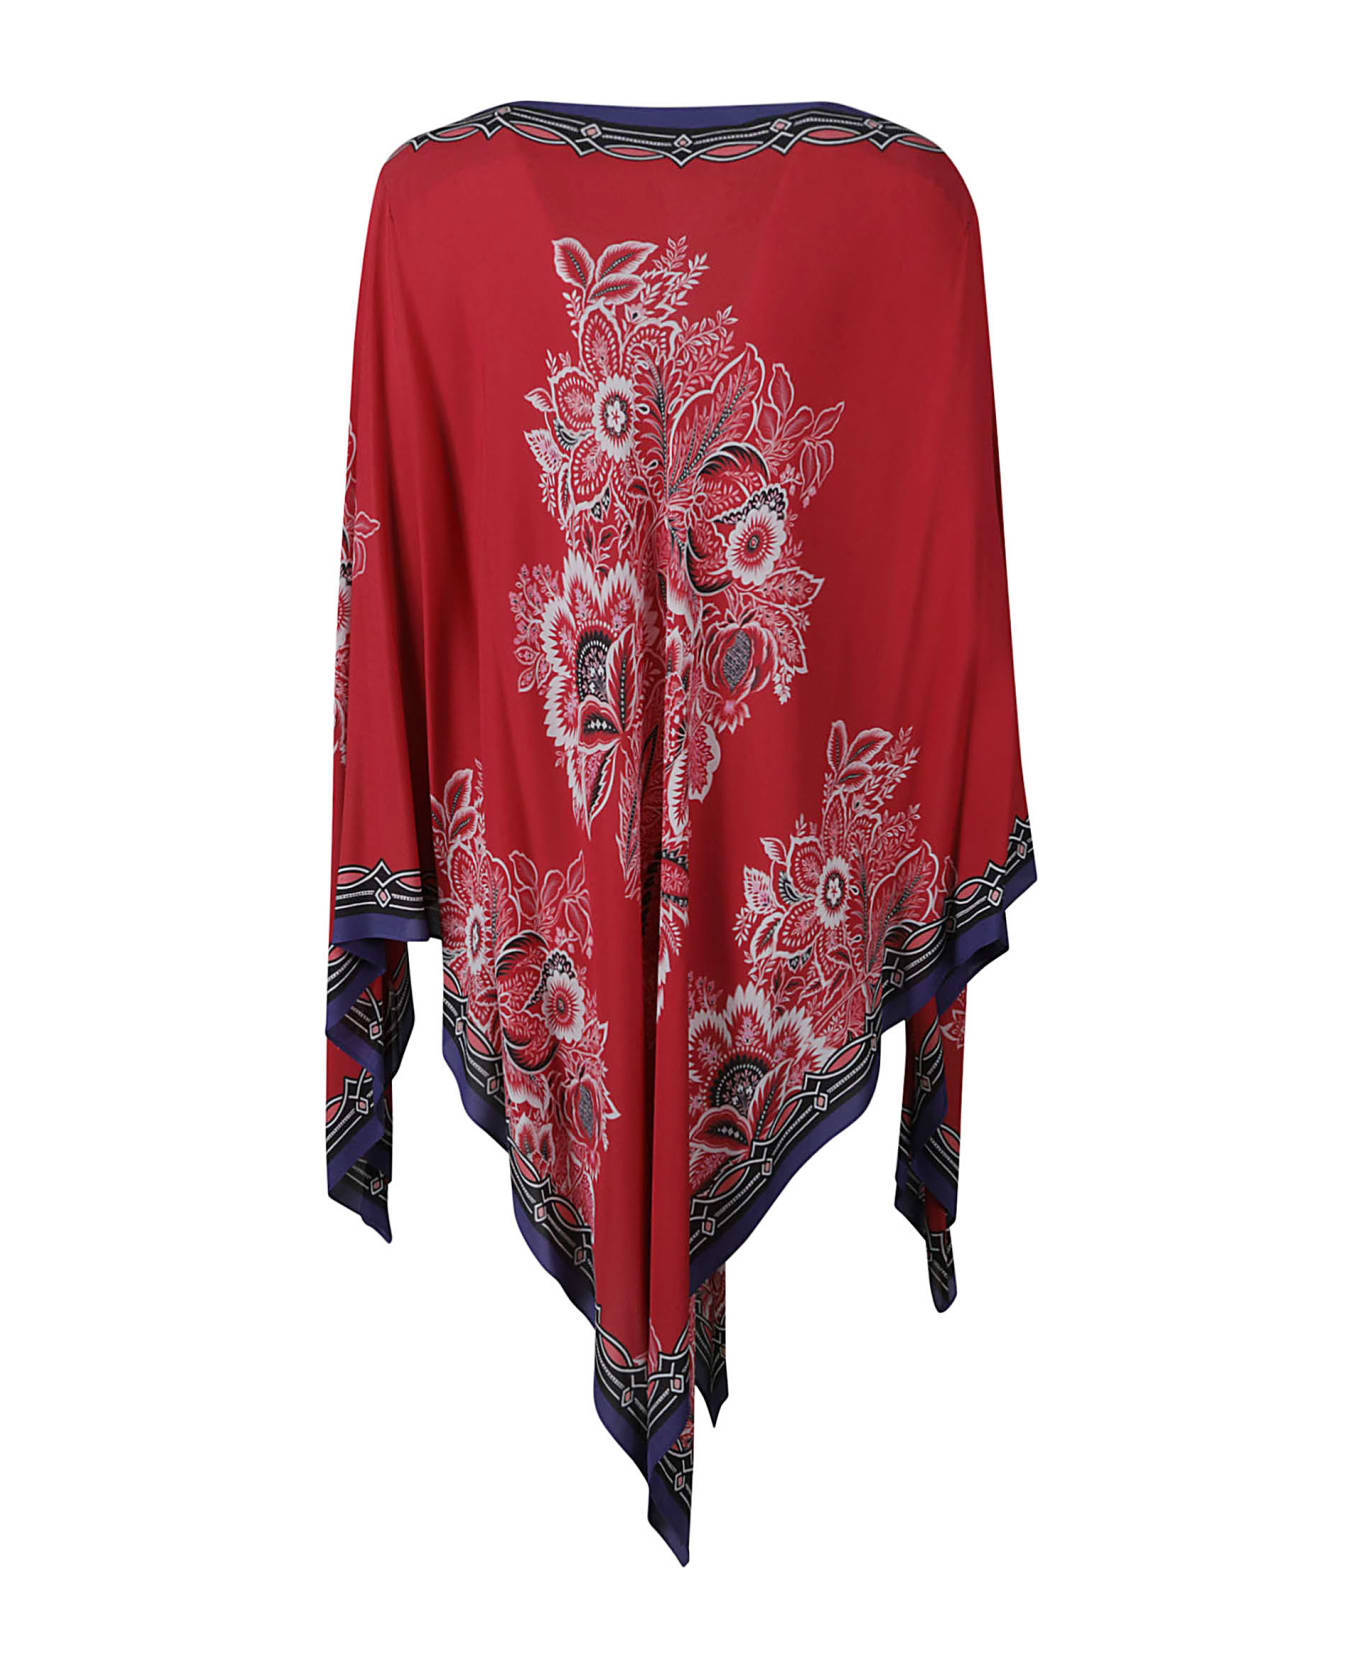 Etro Floral Printed Asymmetric Dress - Red/Multicolor